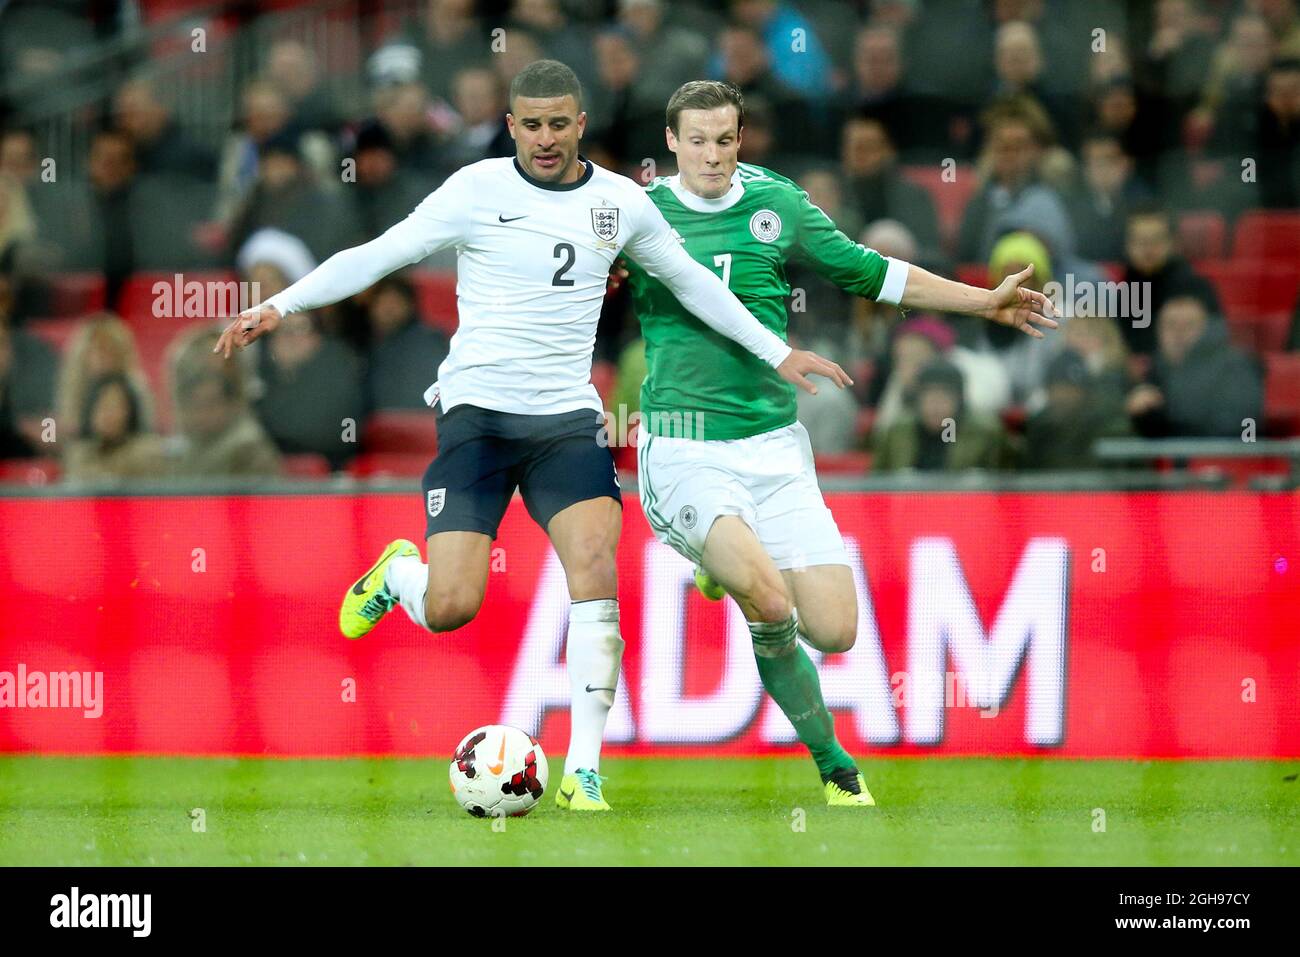 England's Kyle Walker and Germany's Marcell Jansen during the International Friendly match between England and Germany held at the Wembley Stadium in London on Nov. 19, 2013. Stock Photo